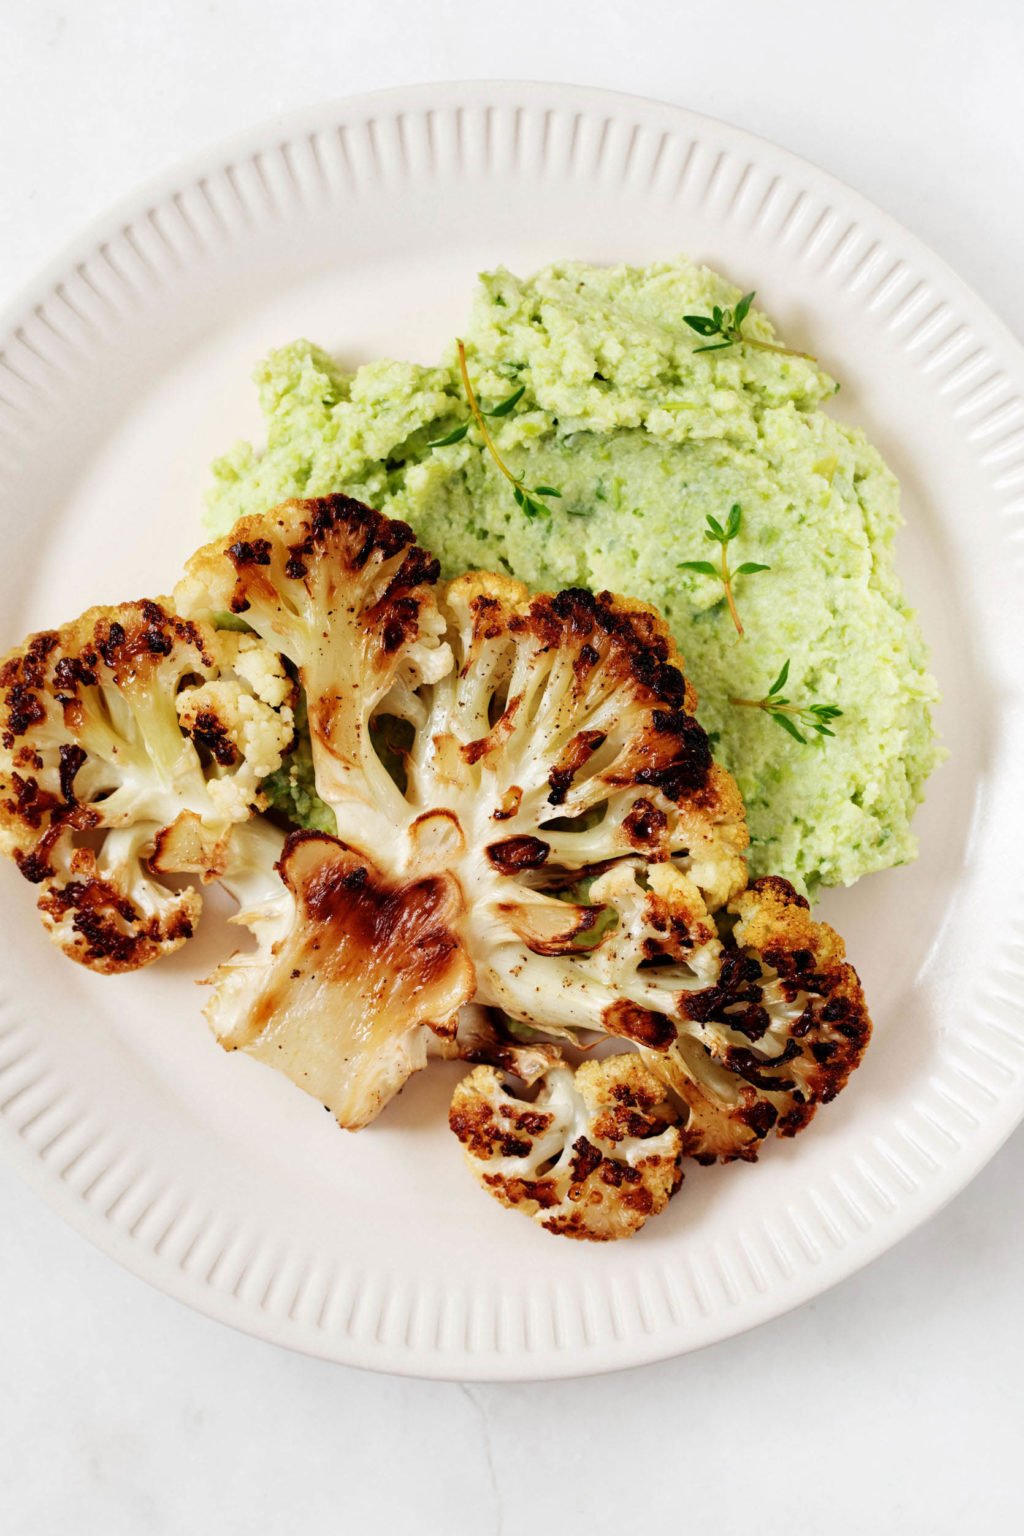 A seared cauliflower steak has been served with a light green edamame mash on a rimmed, cream colored serving plate.